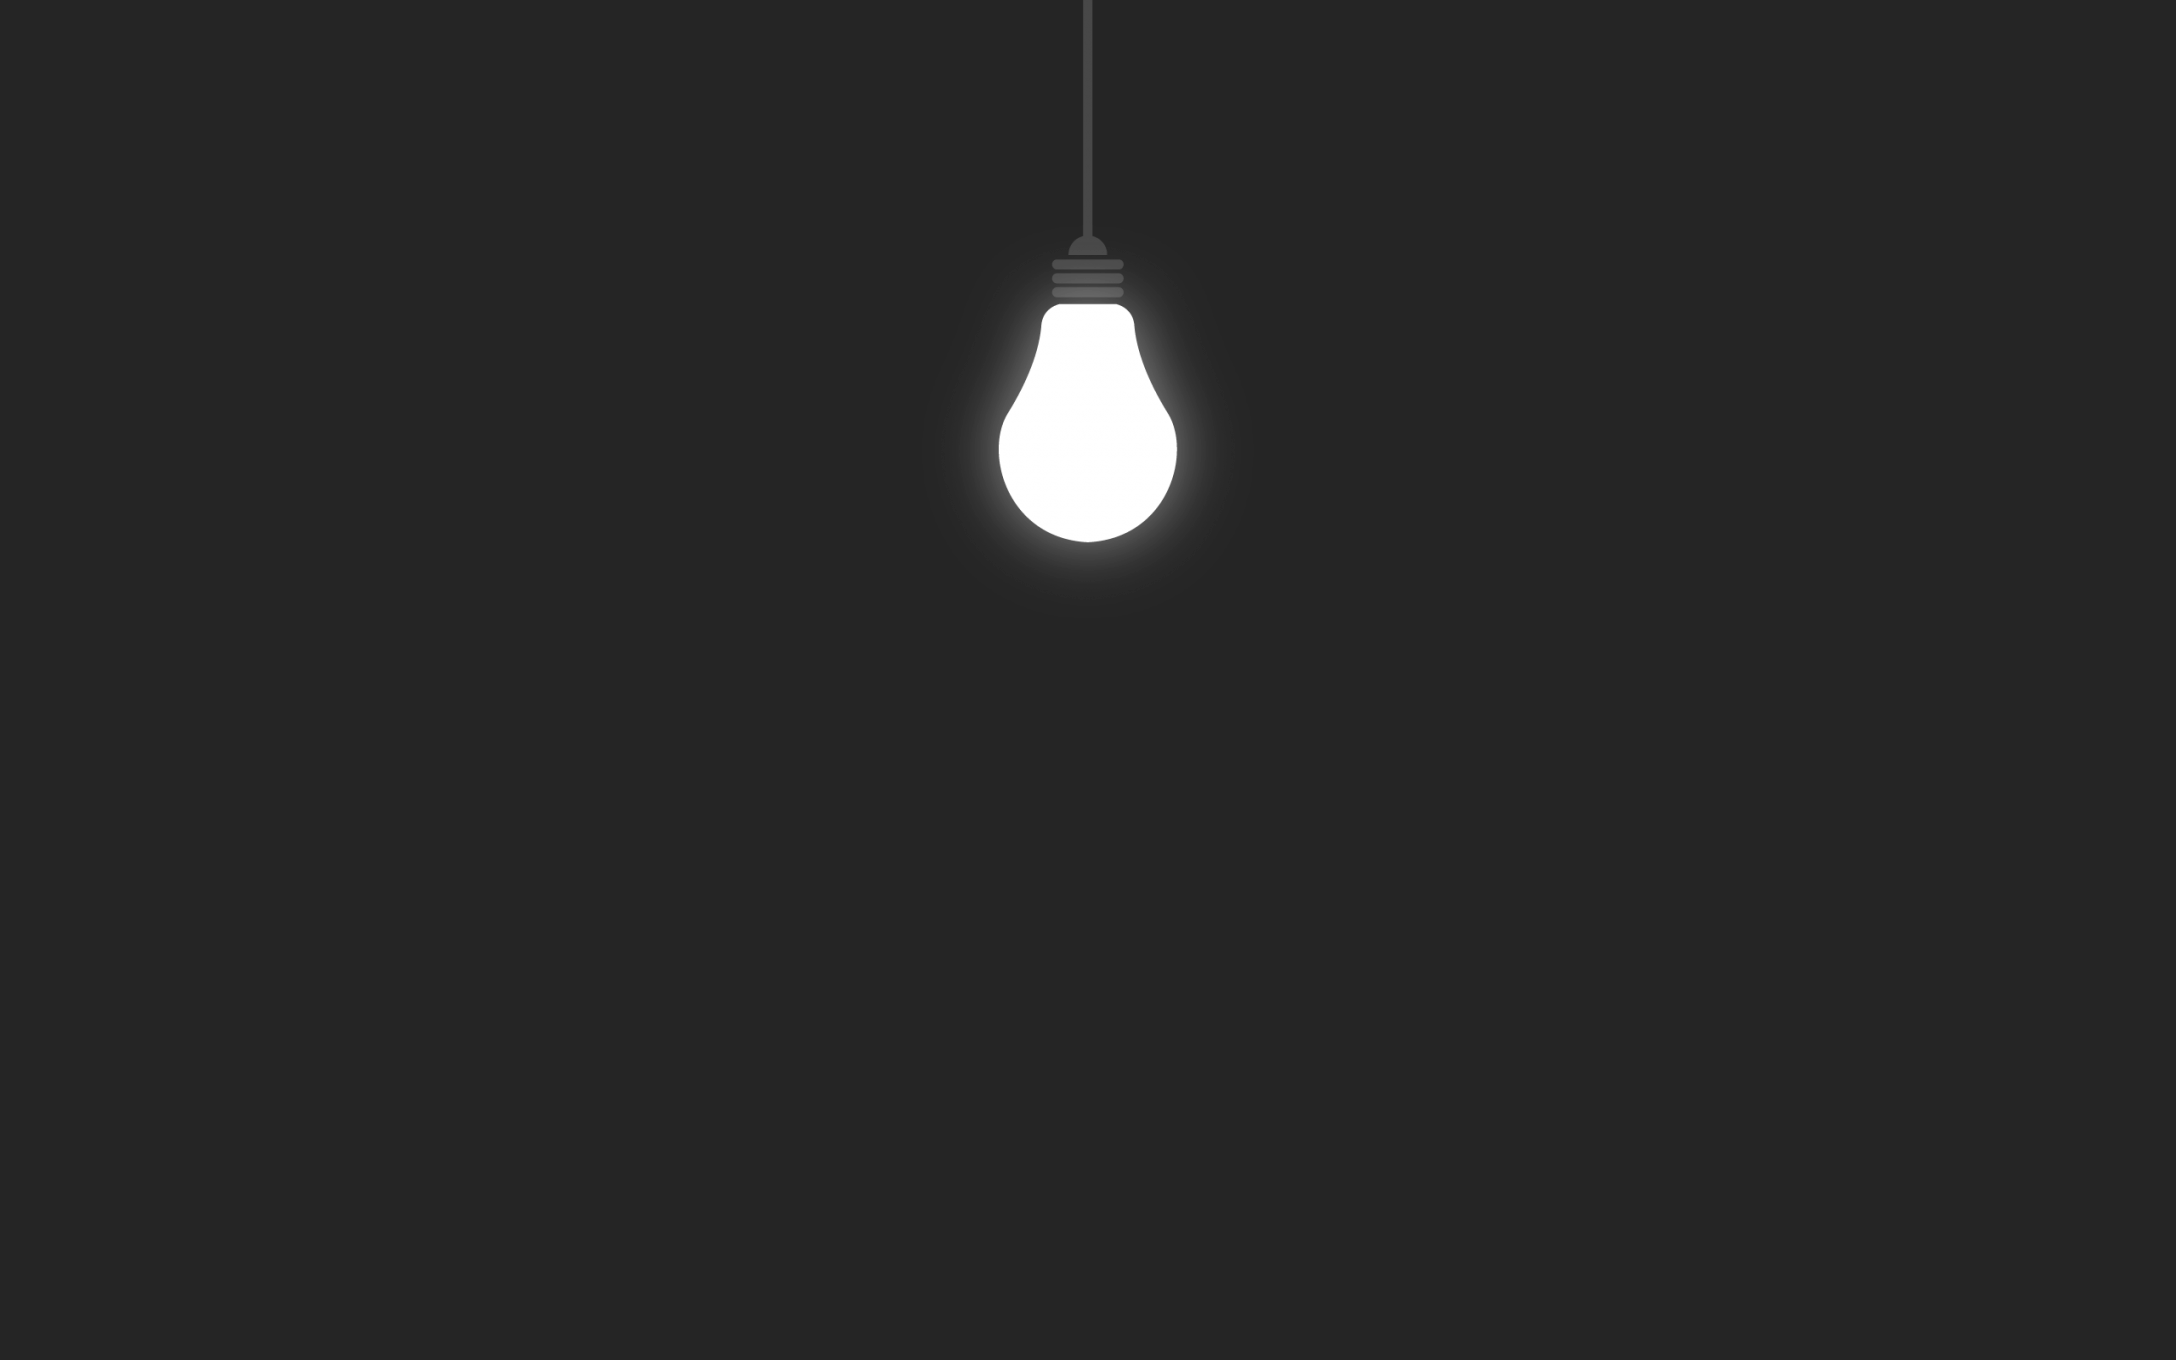 Black And White Wallpaper Saves Battery. Wallpaper HD High